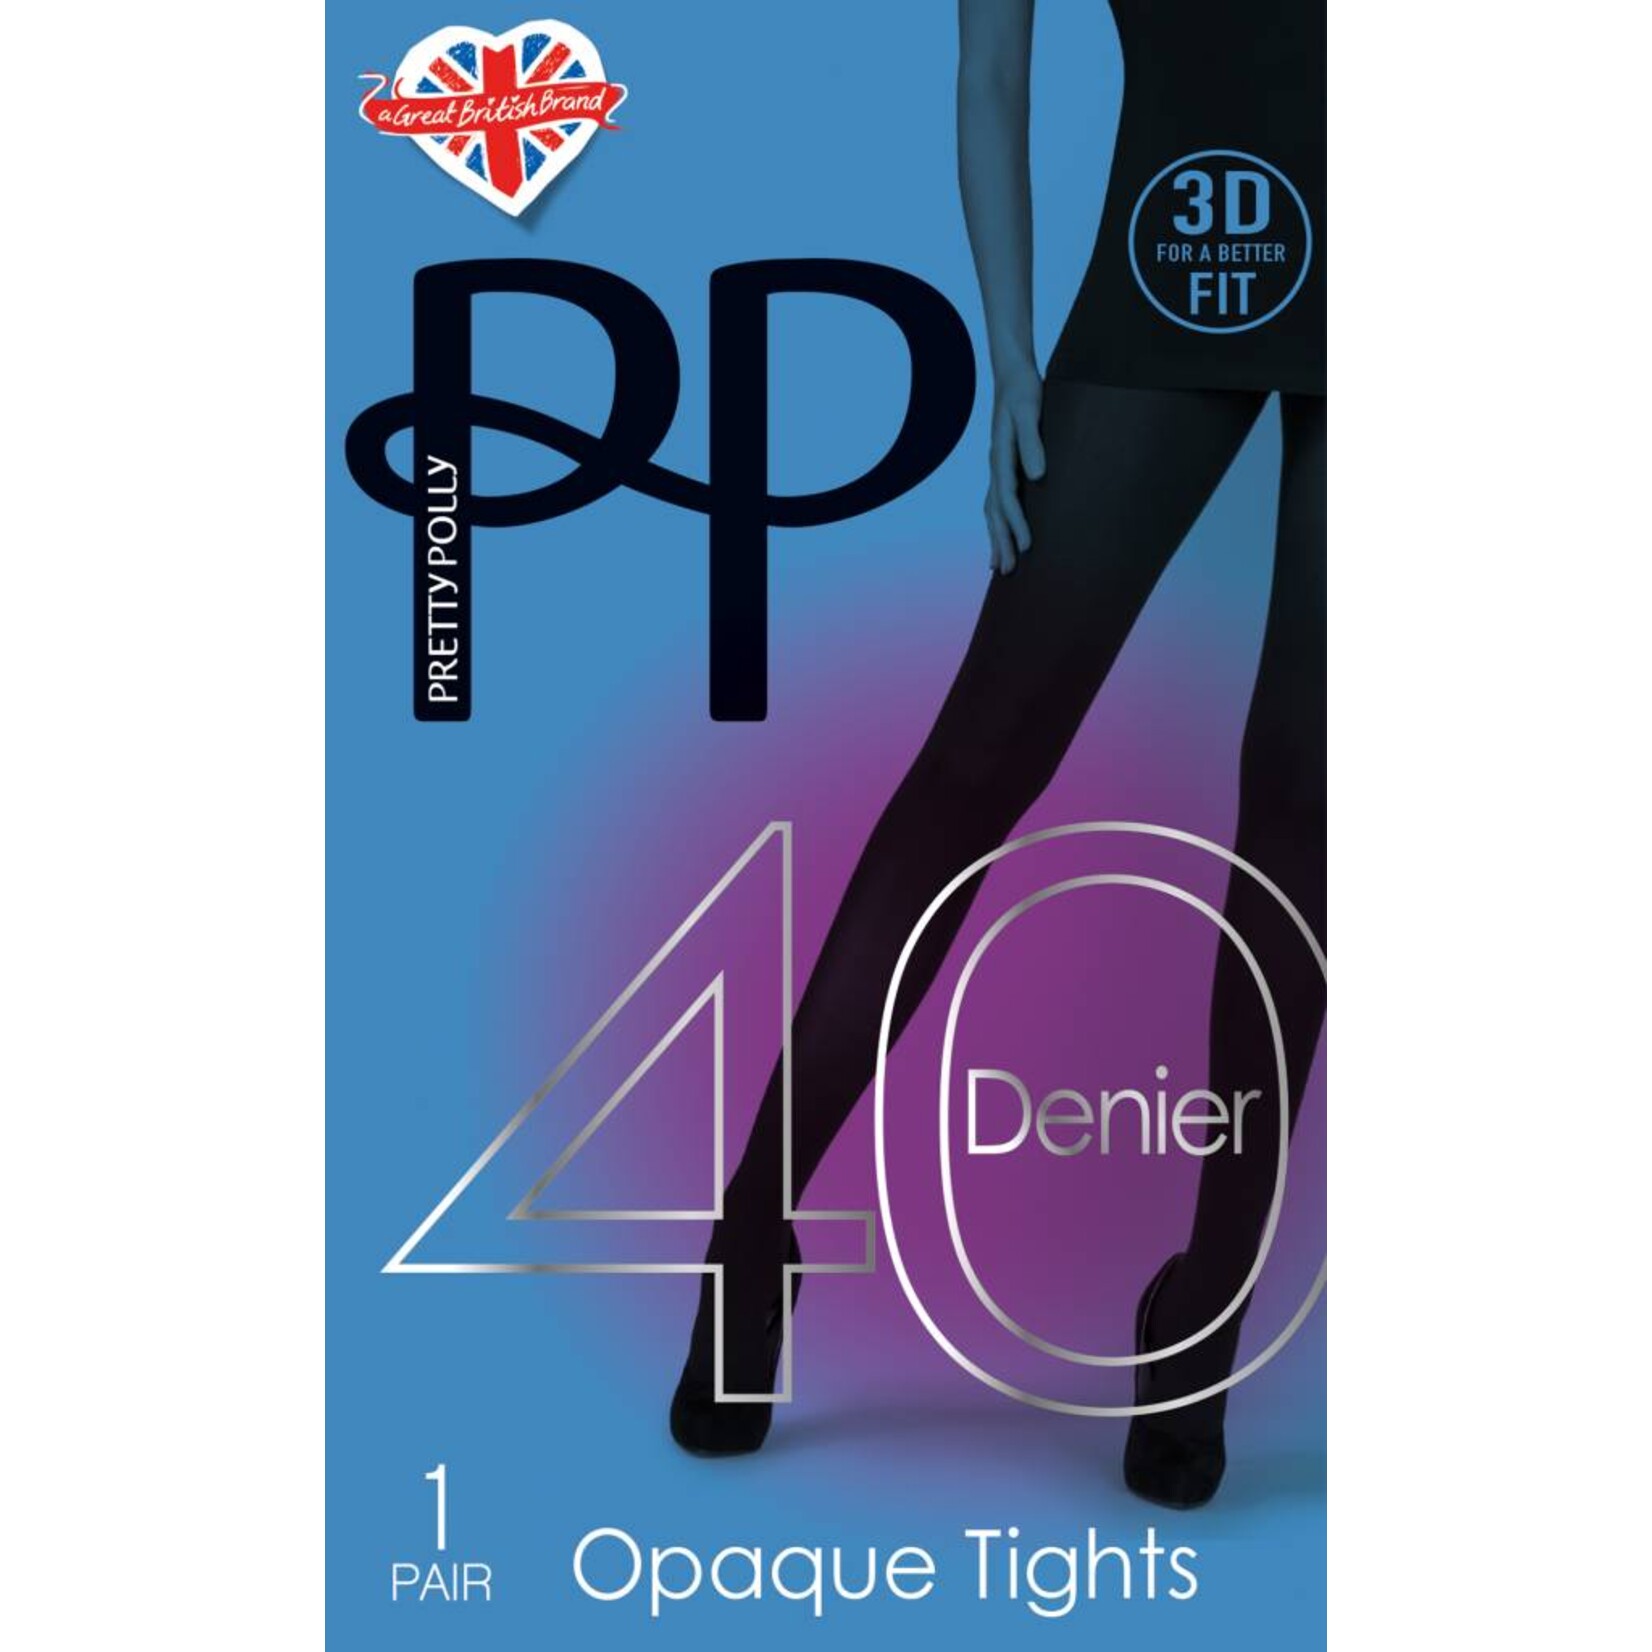 Pretty Polly  40D opaque Tights in 3D